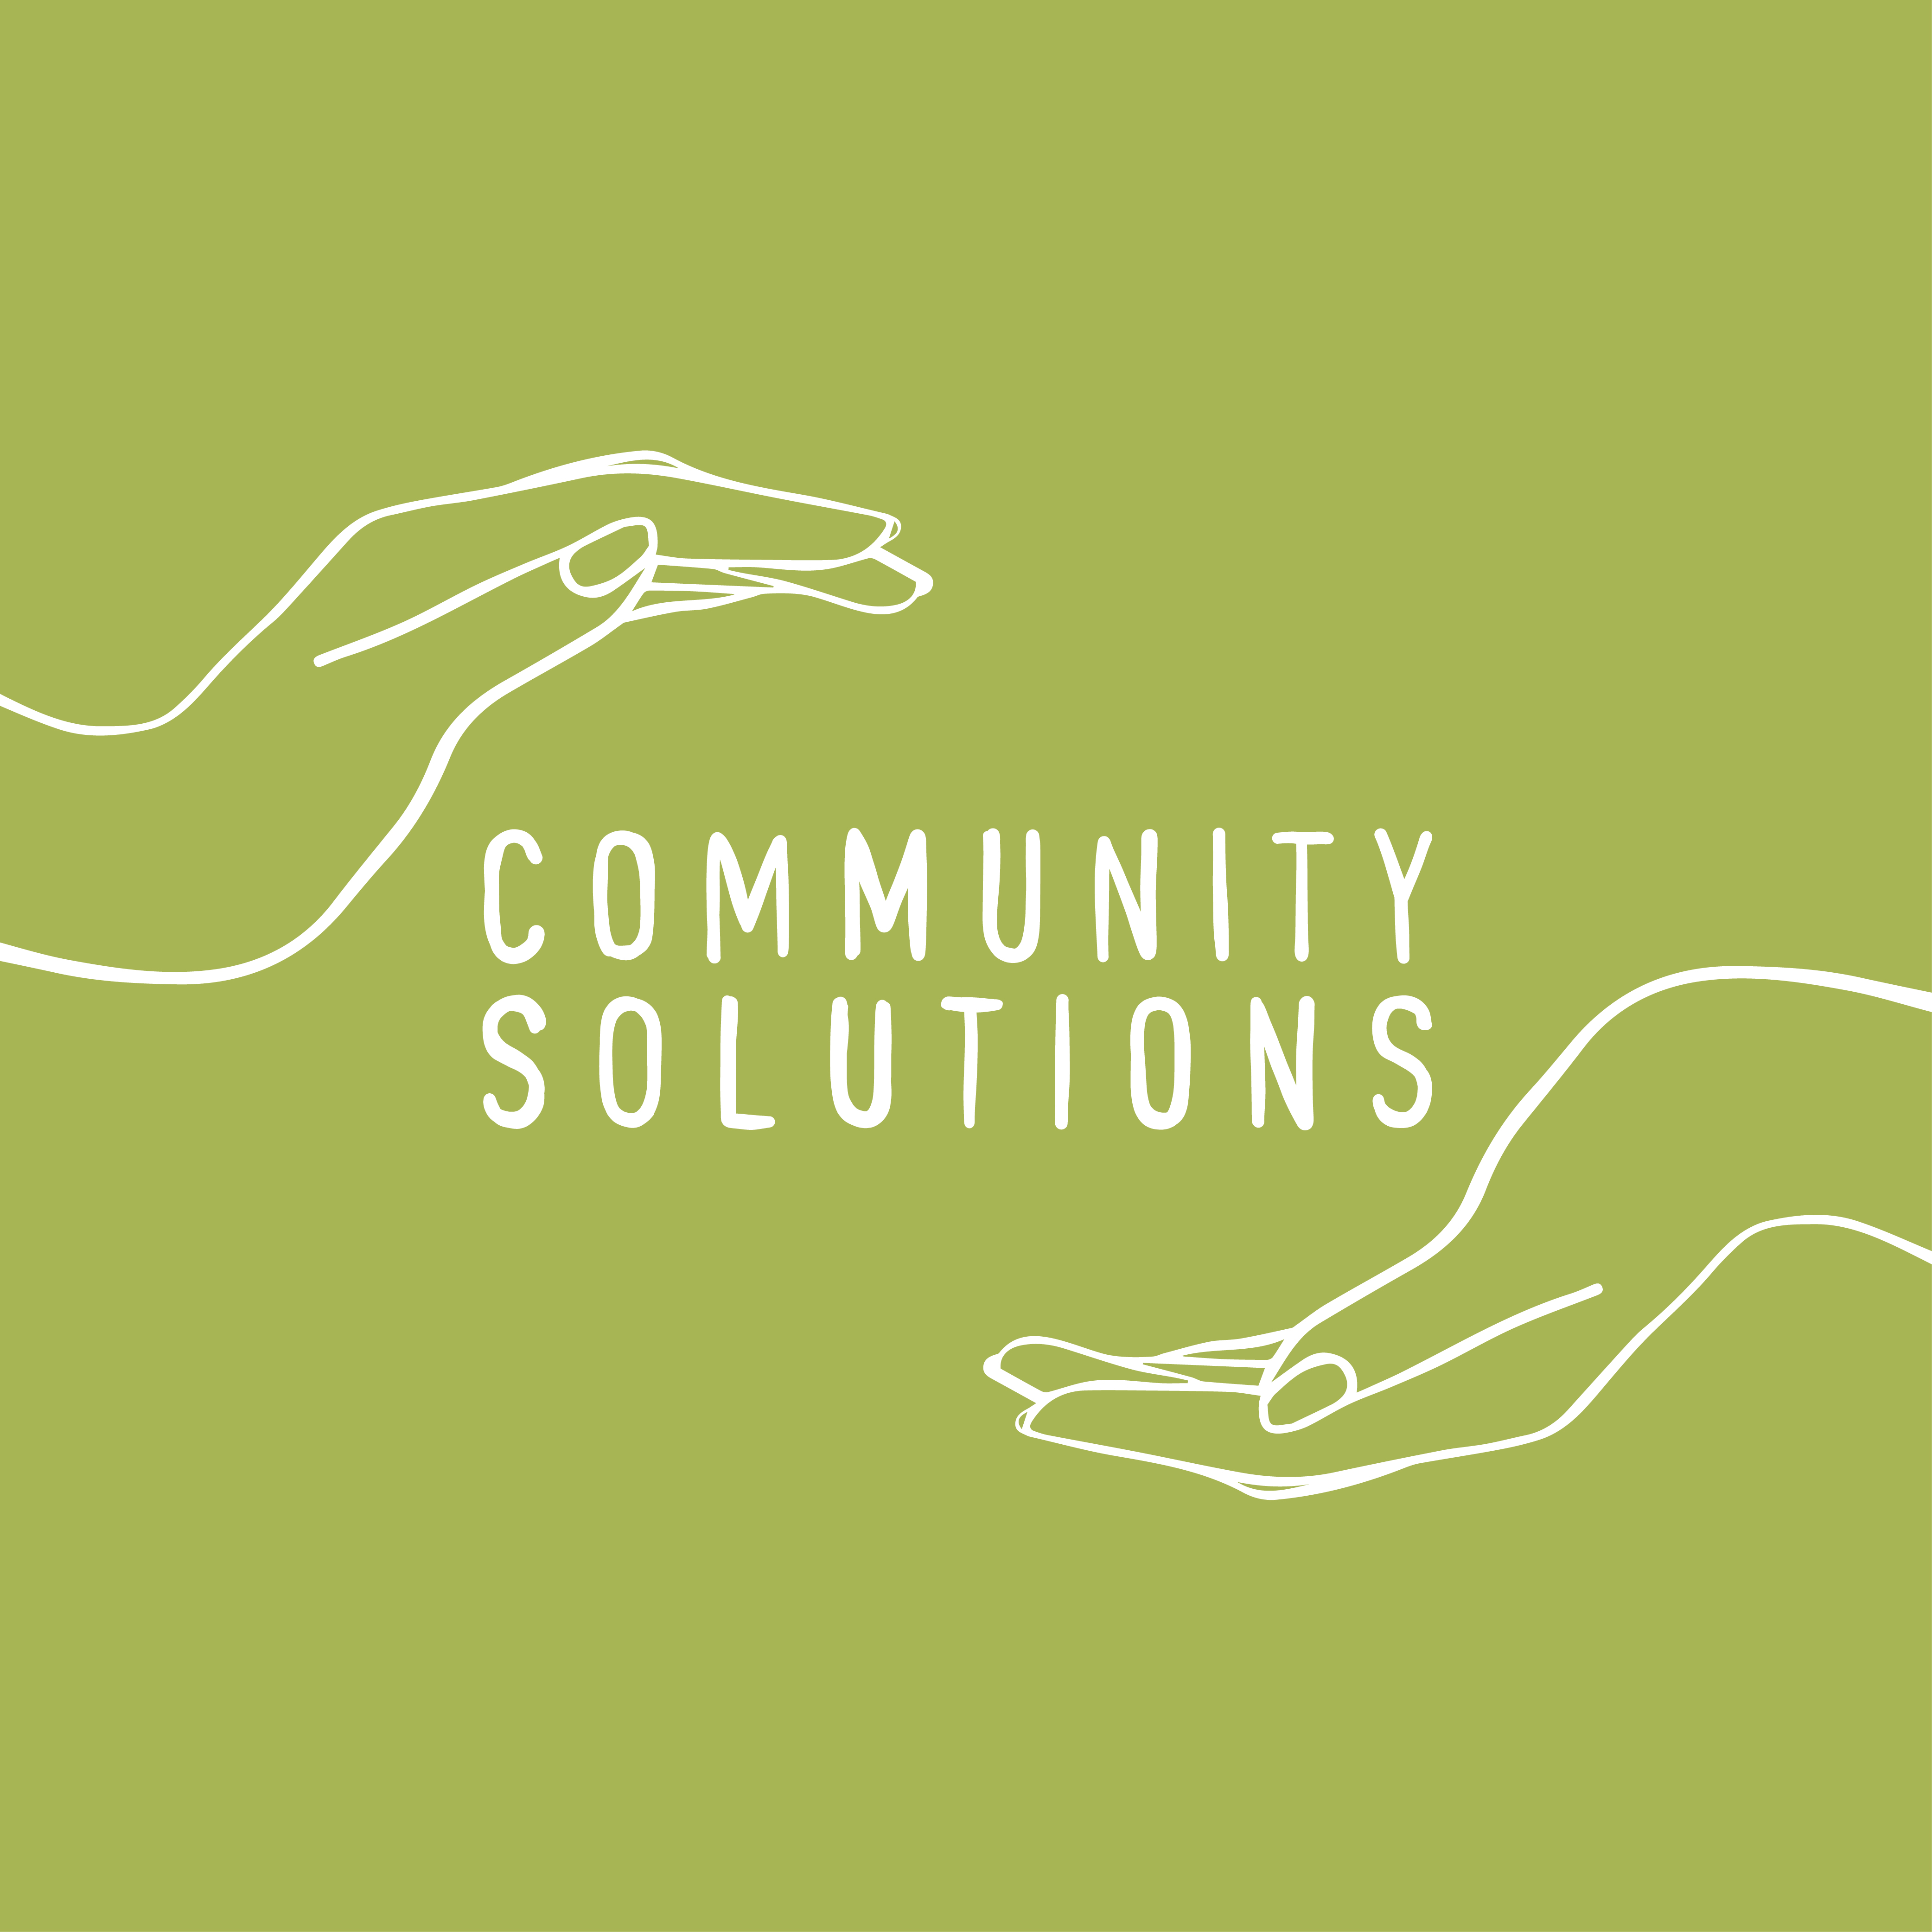 Episode 16: How a Rural Health Coalition Transformed the Health and Well-Being of its Rural Community